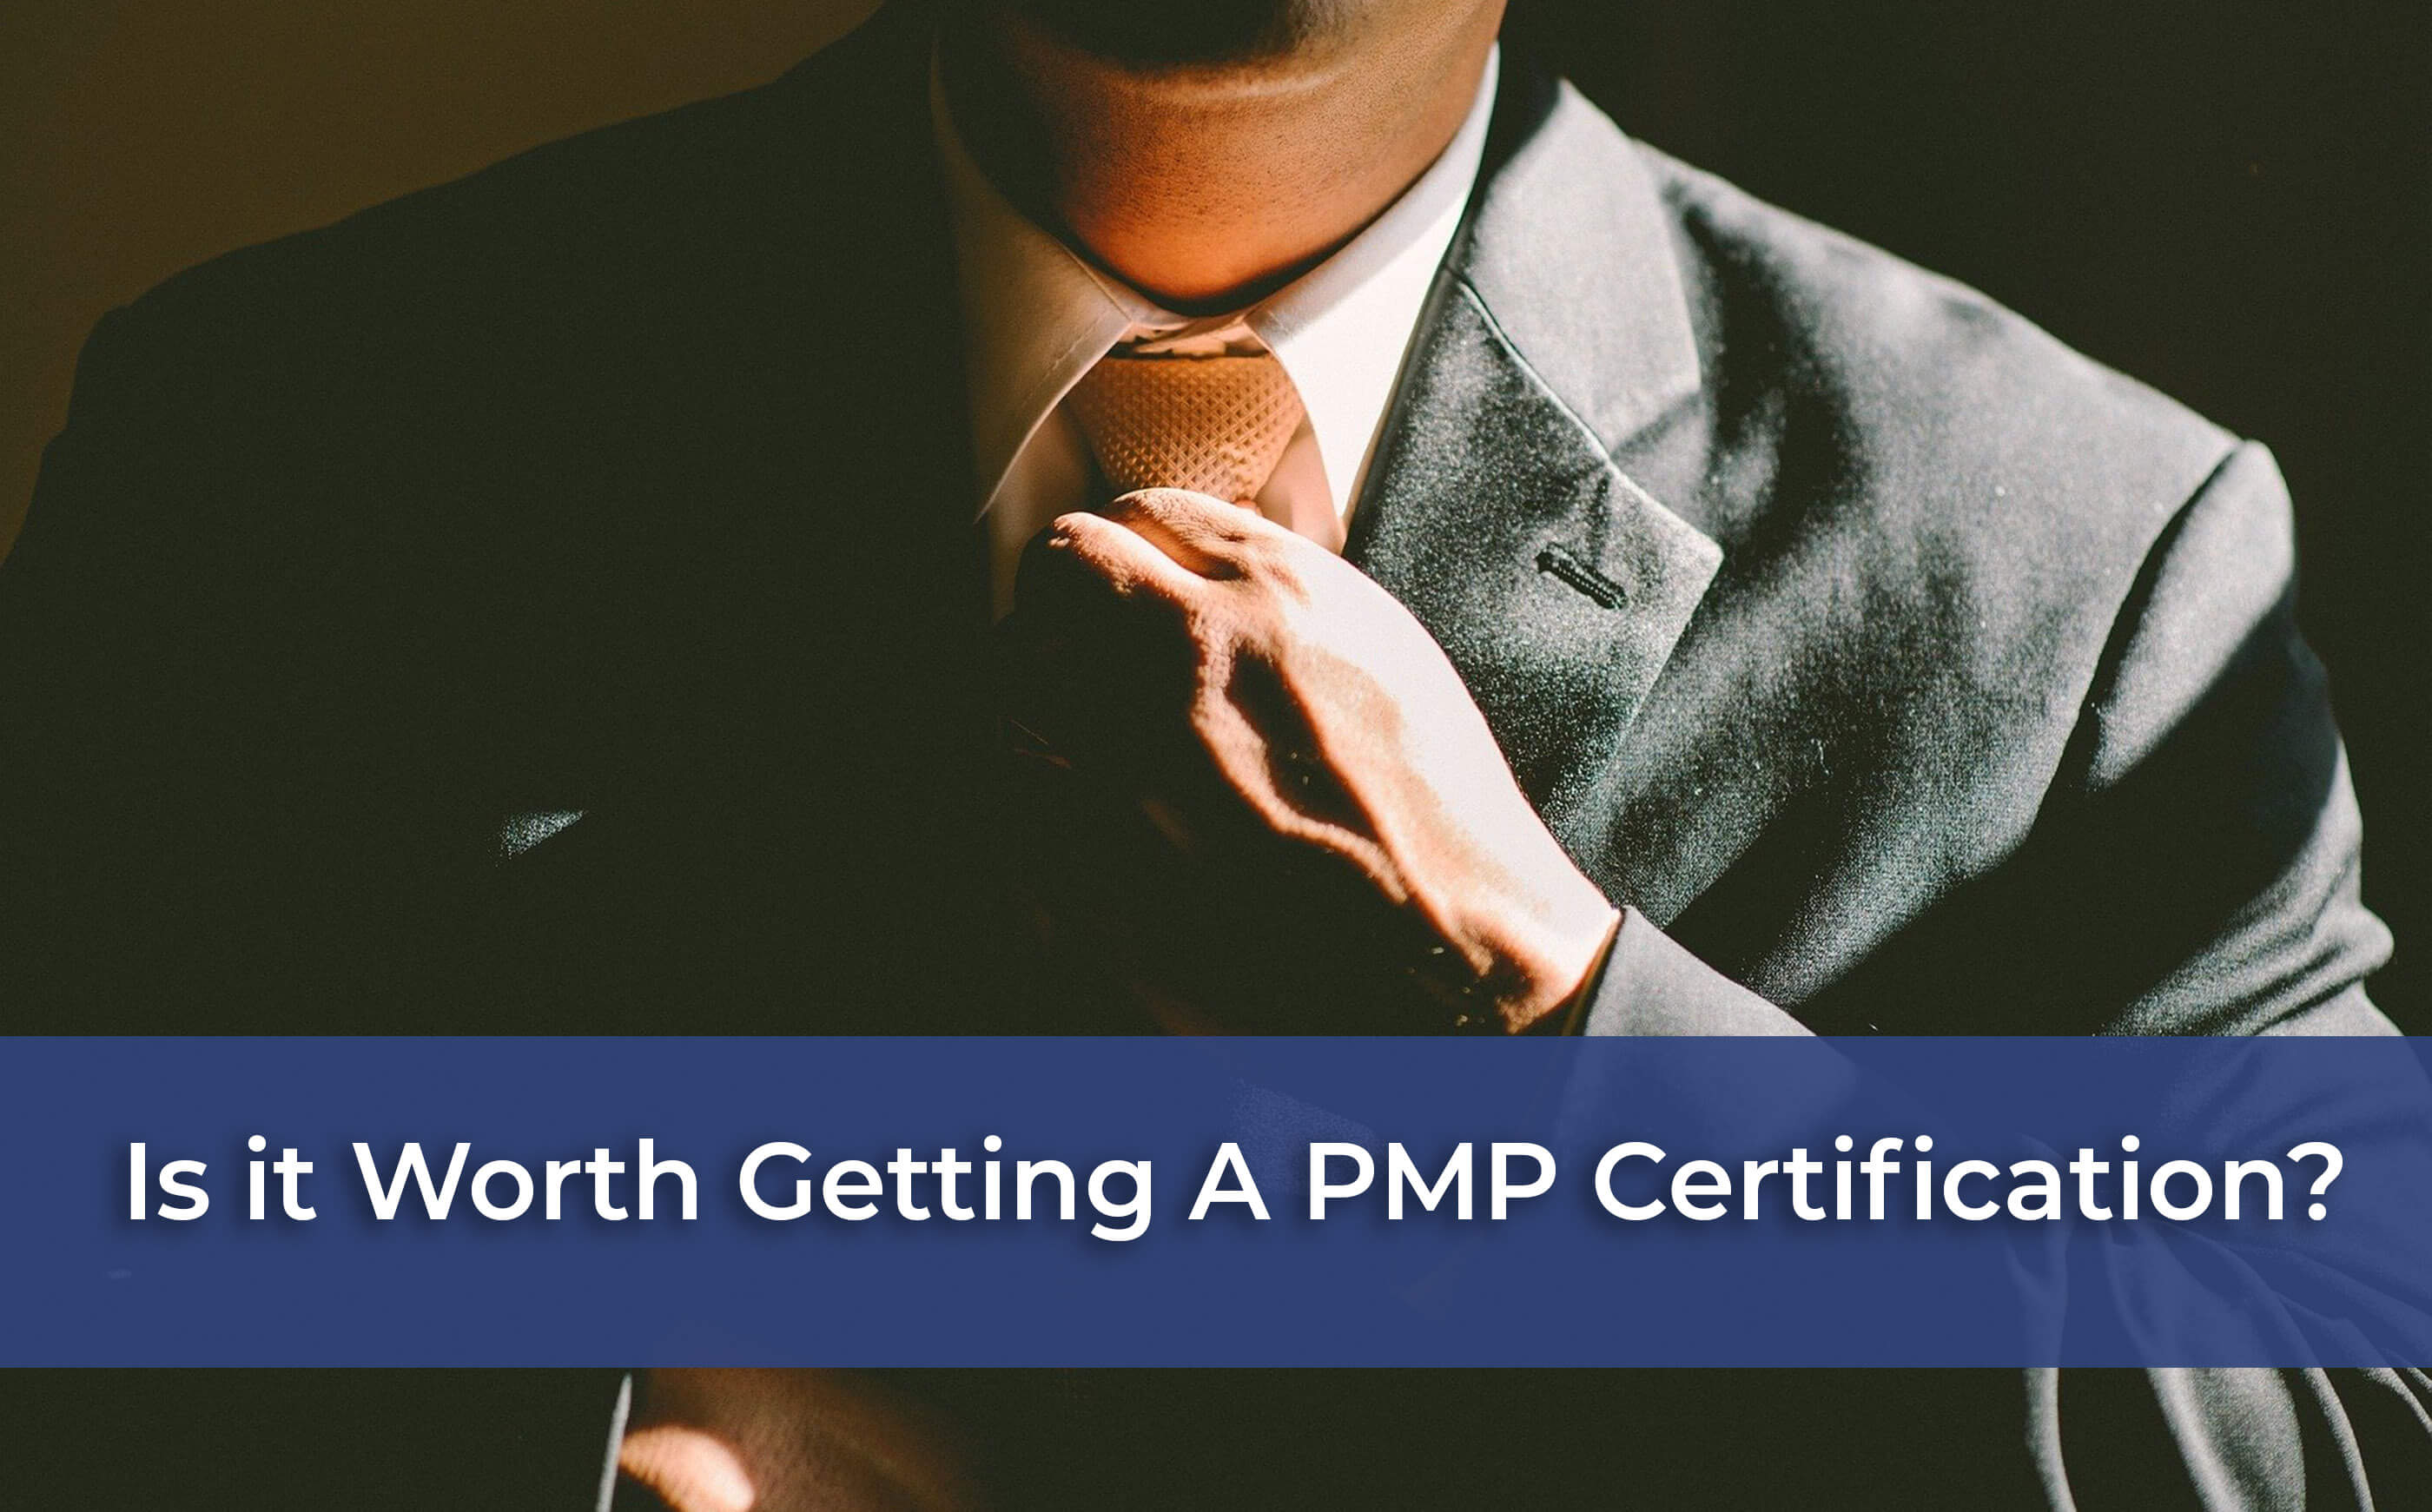 Is It Worth Getting a PMP (Project Management Professional